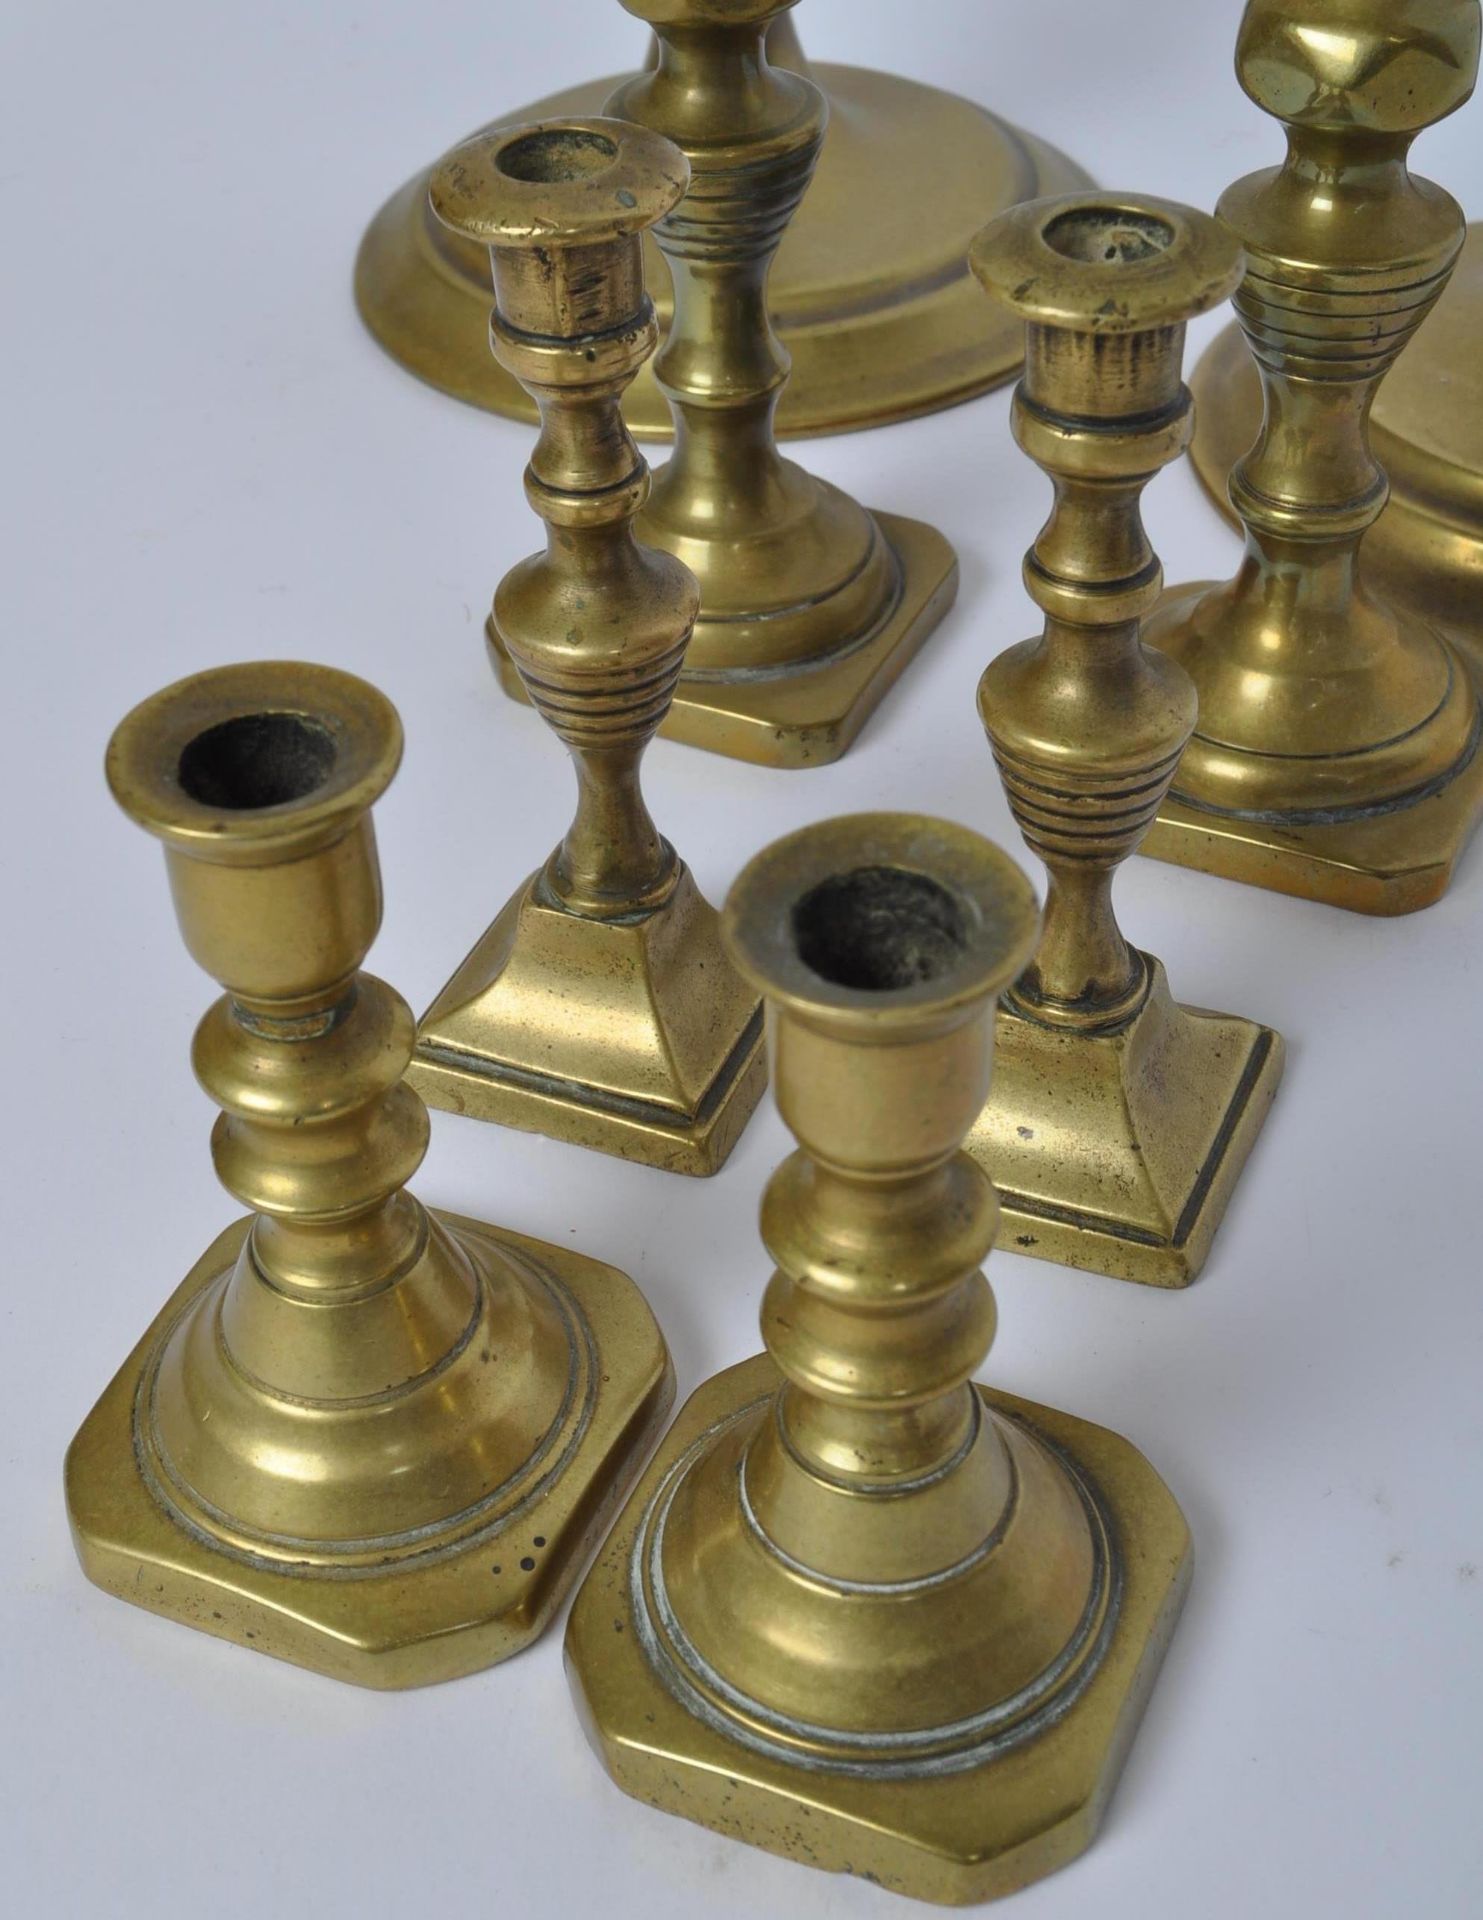 ASSORTMENT OF EARLY 20TH CENTURY BRASS CANDLESTICKS - Image 2 of 4